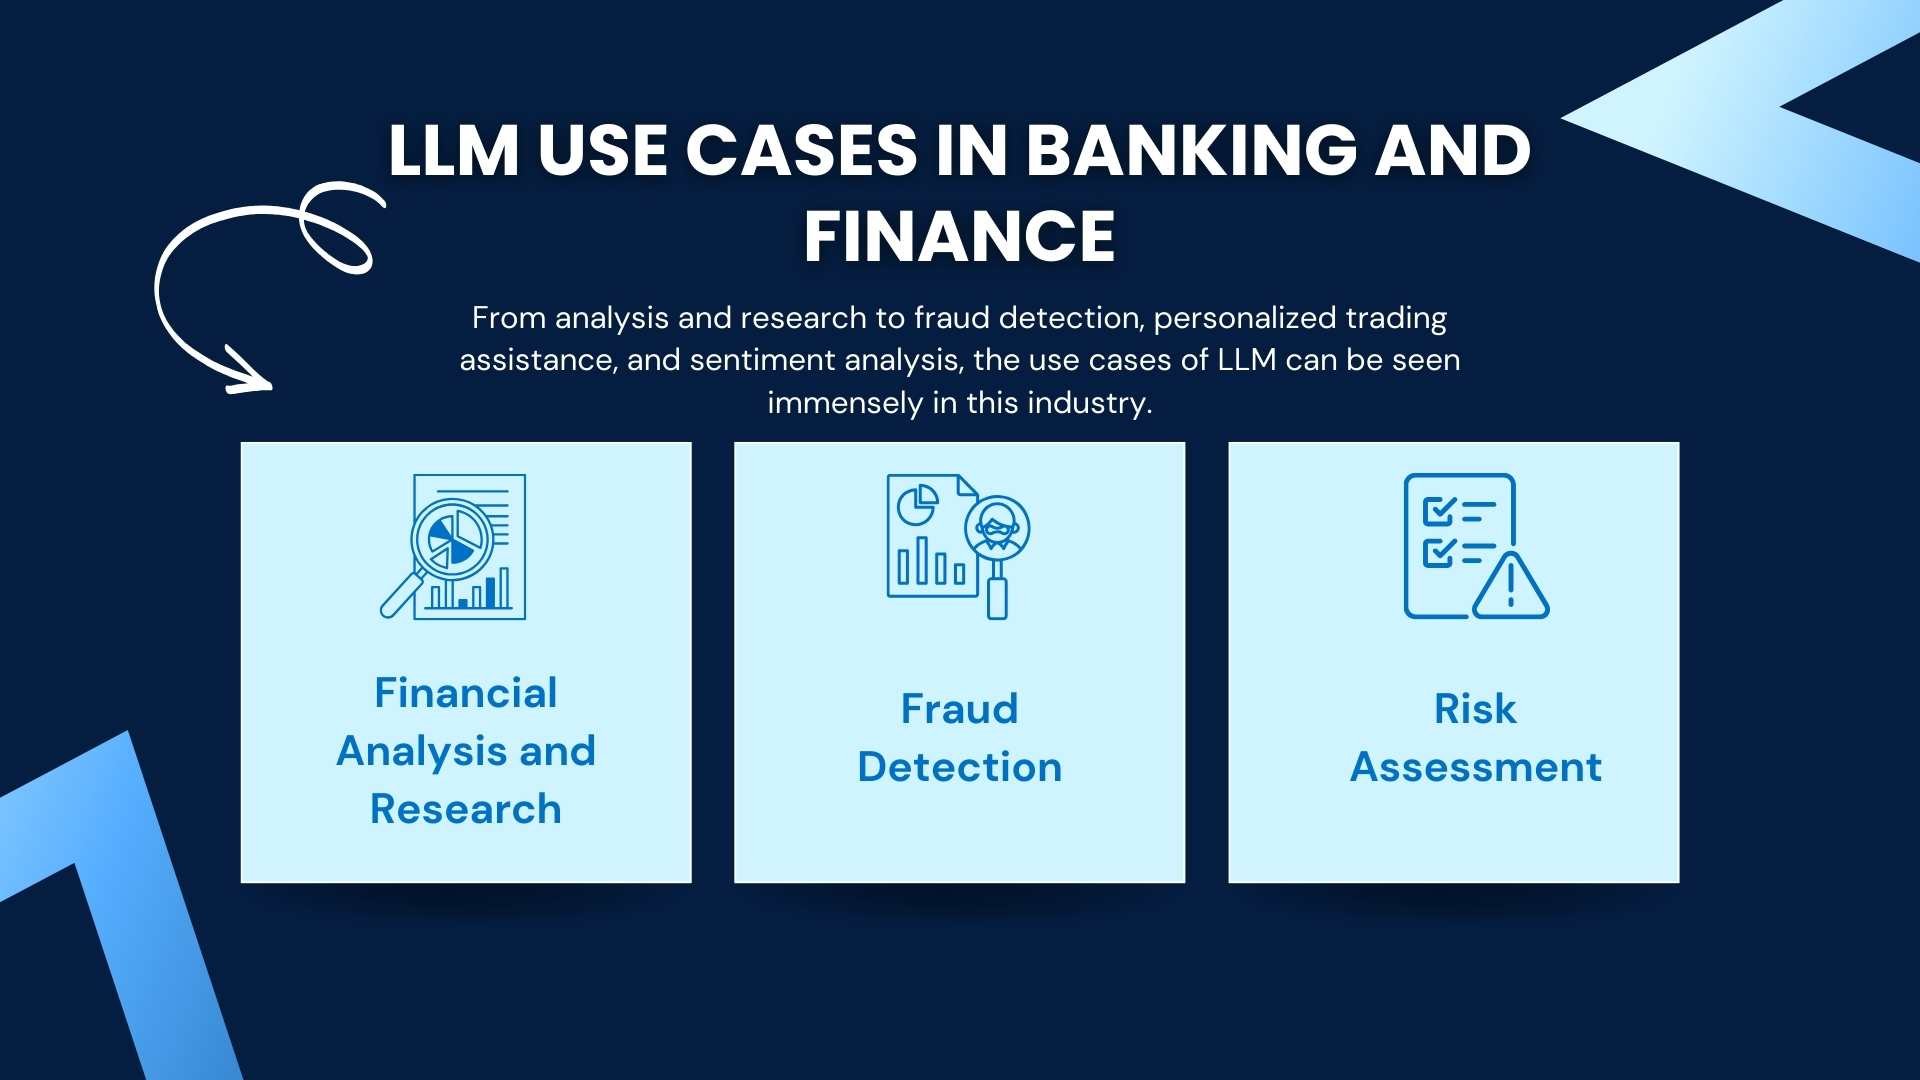 LLM Use Cases in Banking and Finance